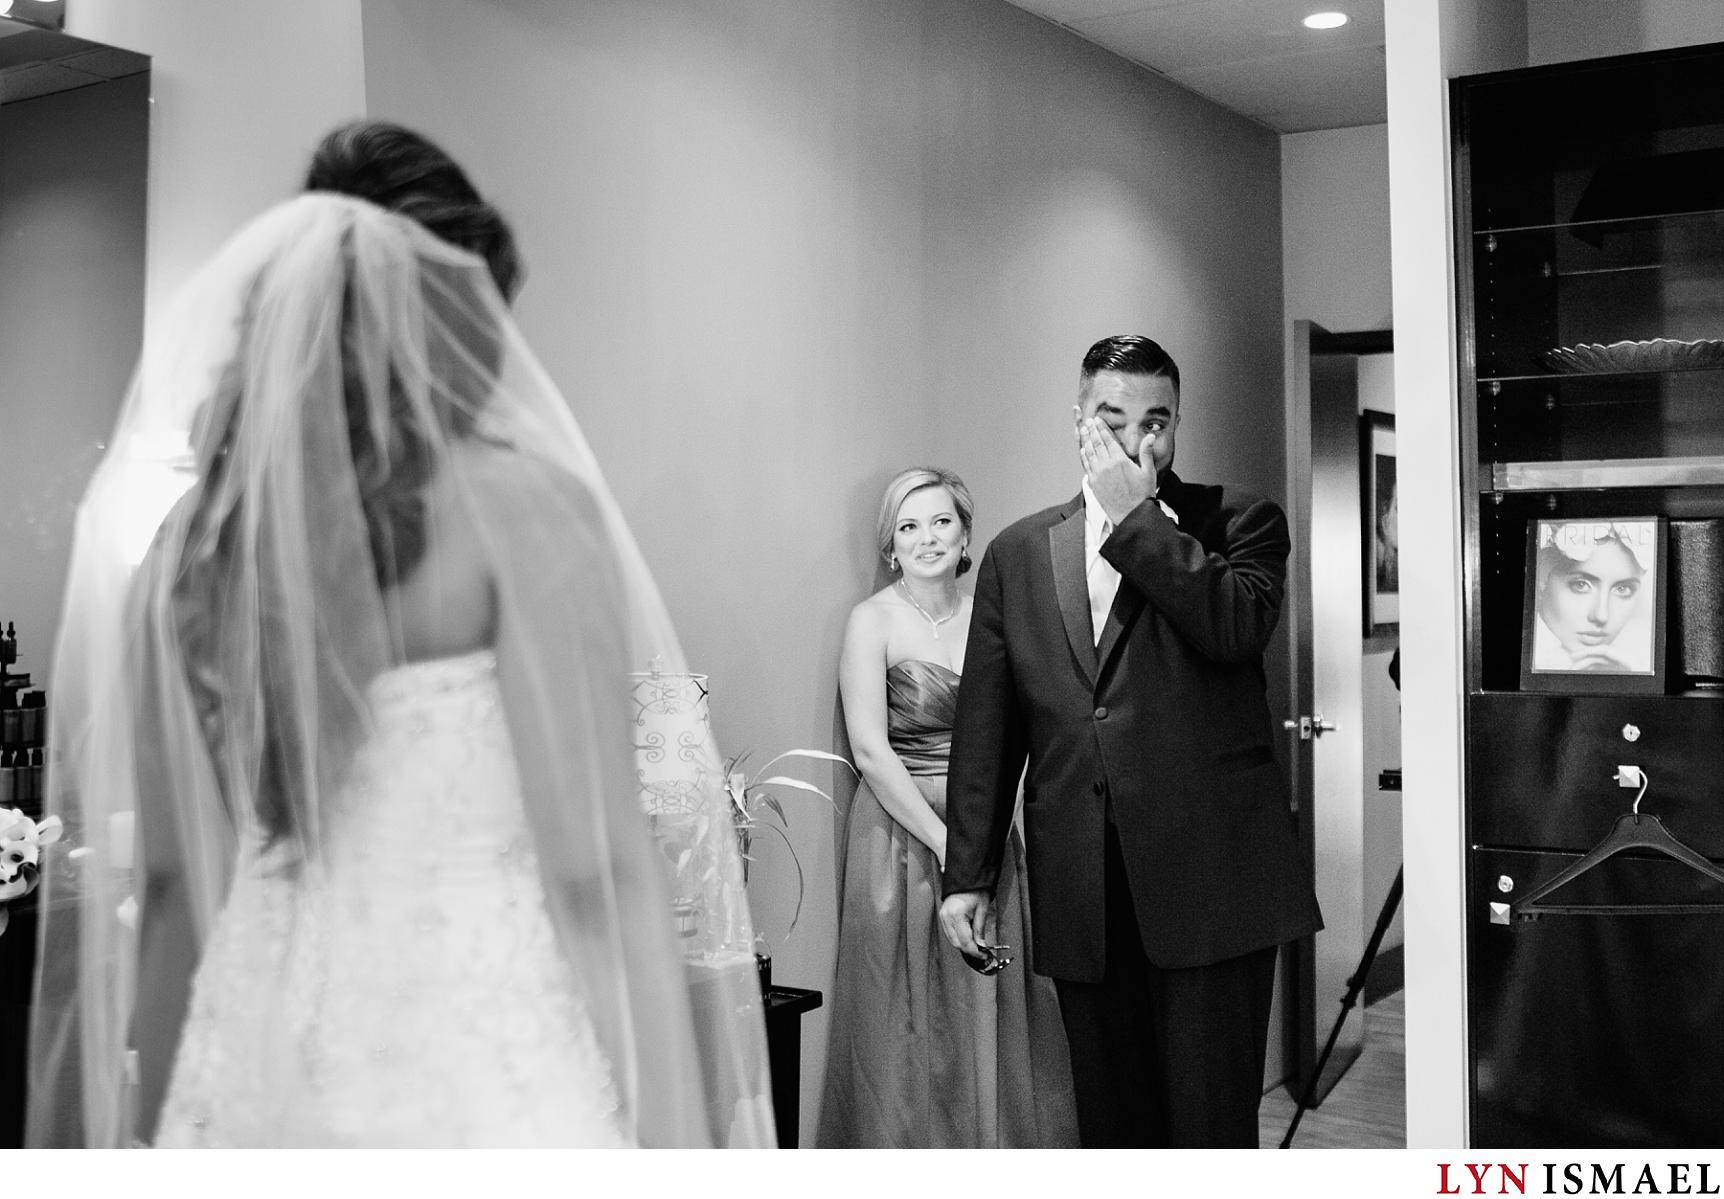 the groom becomes emotional seeing his bride.